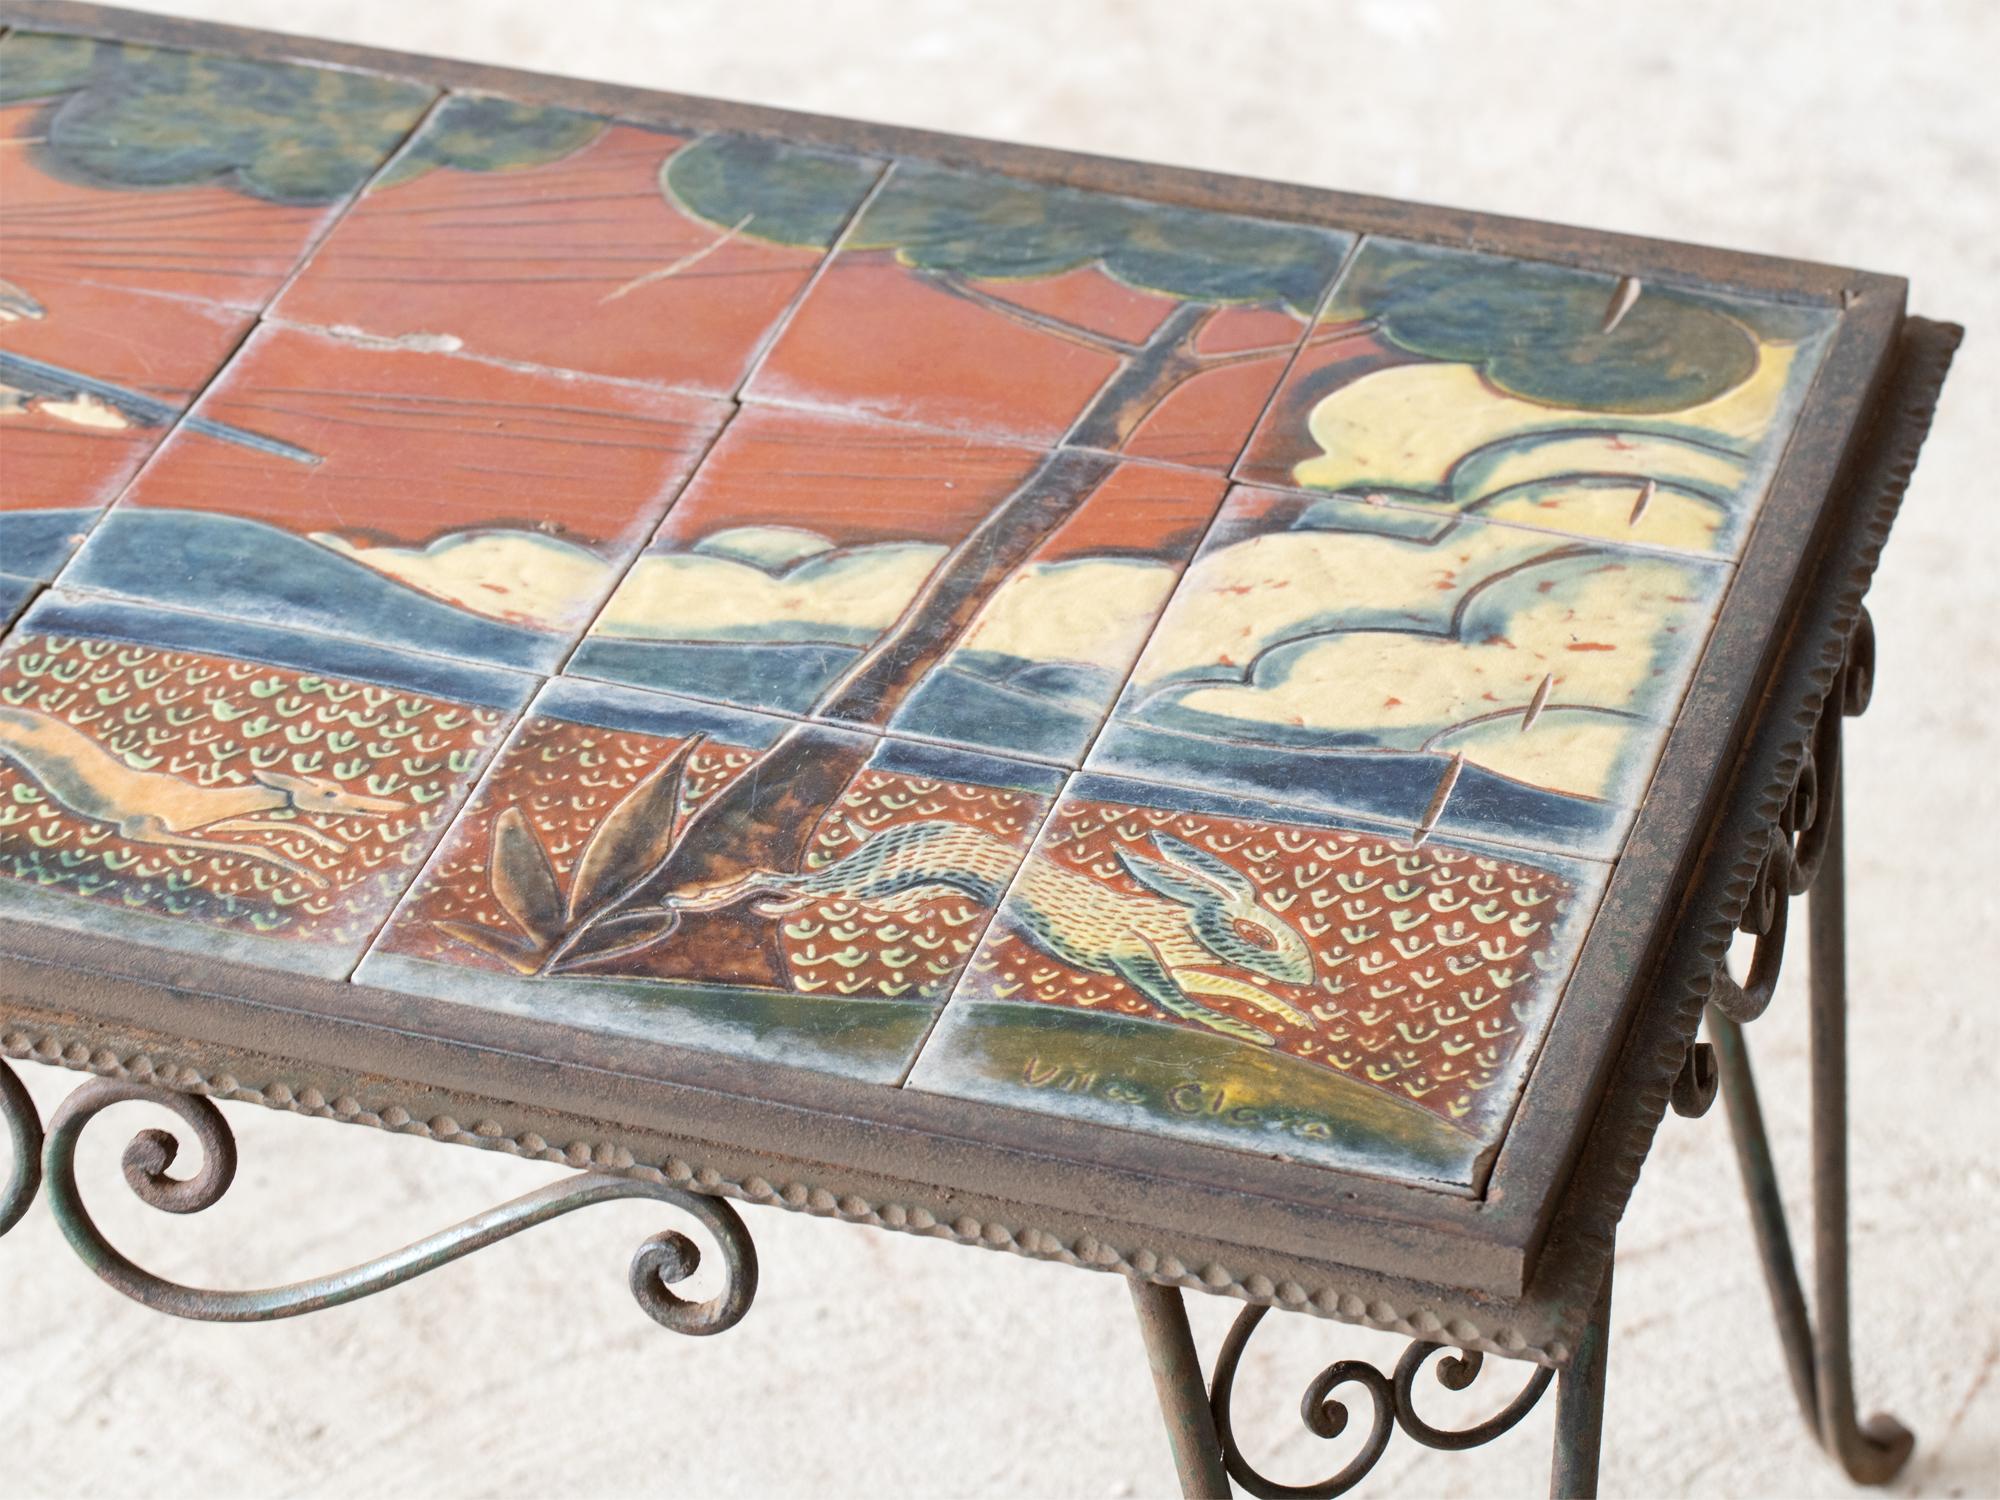 Hand-Painted Catalonian Vilà Clara Coffee Table, Mid 20th Century For Sale